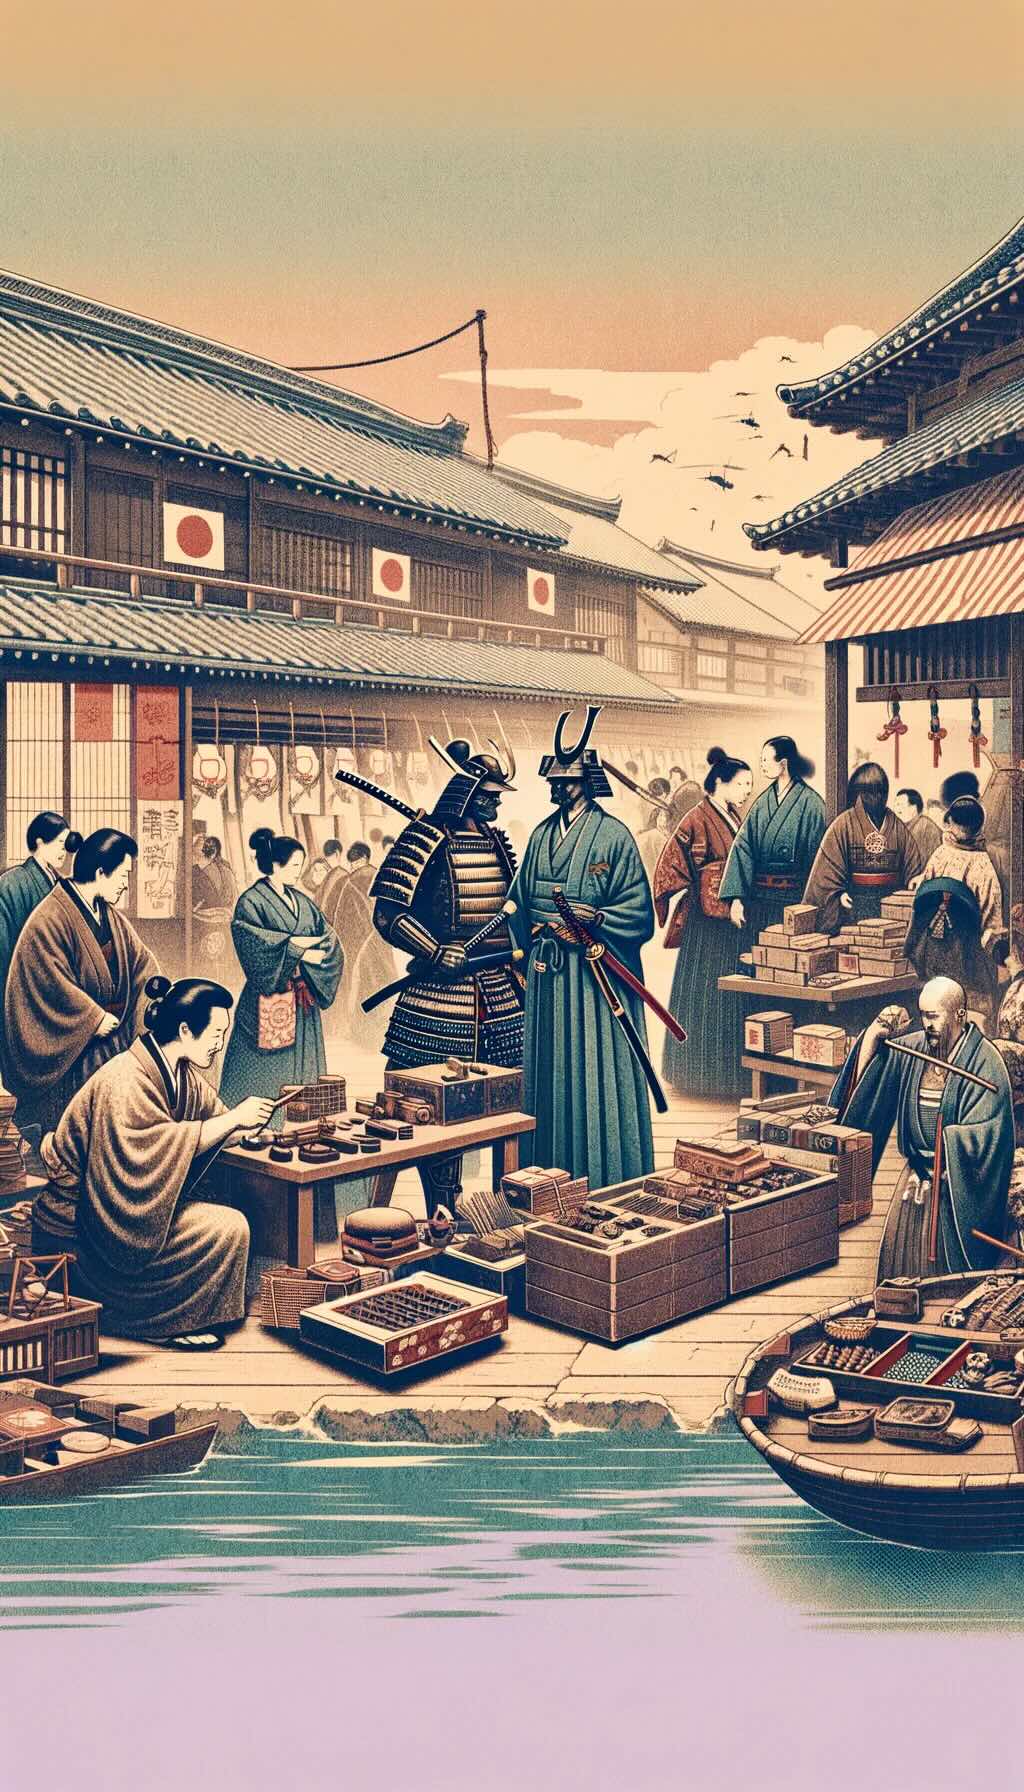 The samurai era and the rise of the merchant class, 'chonin', in feudal Japan. It depicts samurai warriors admiring traditional crafts, highlighting their appreciation for aesthetics and spiritual significance, alongside the bustling activities of the chonin in early marketplaces, signifying the transition from feudal to modern commercial practices in Japan